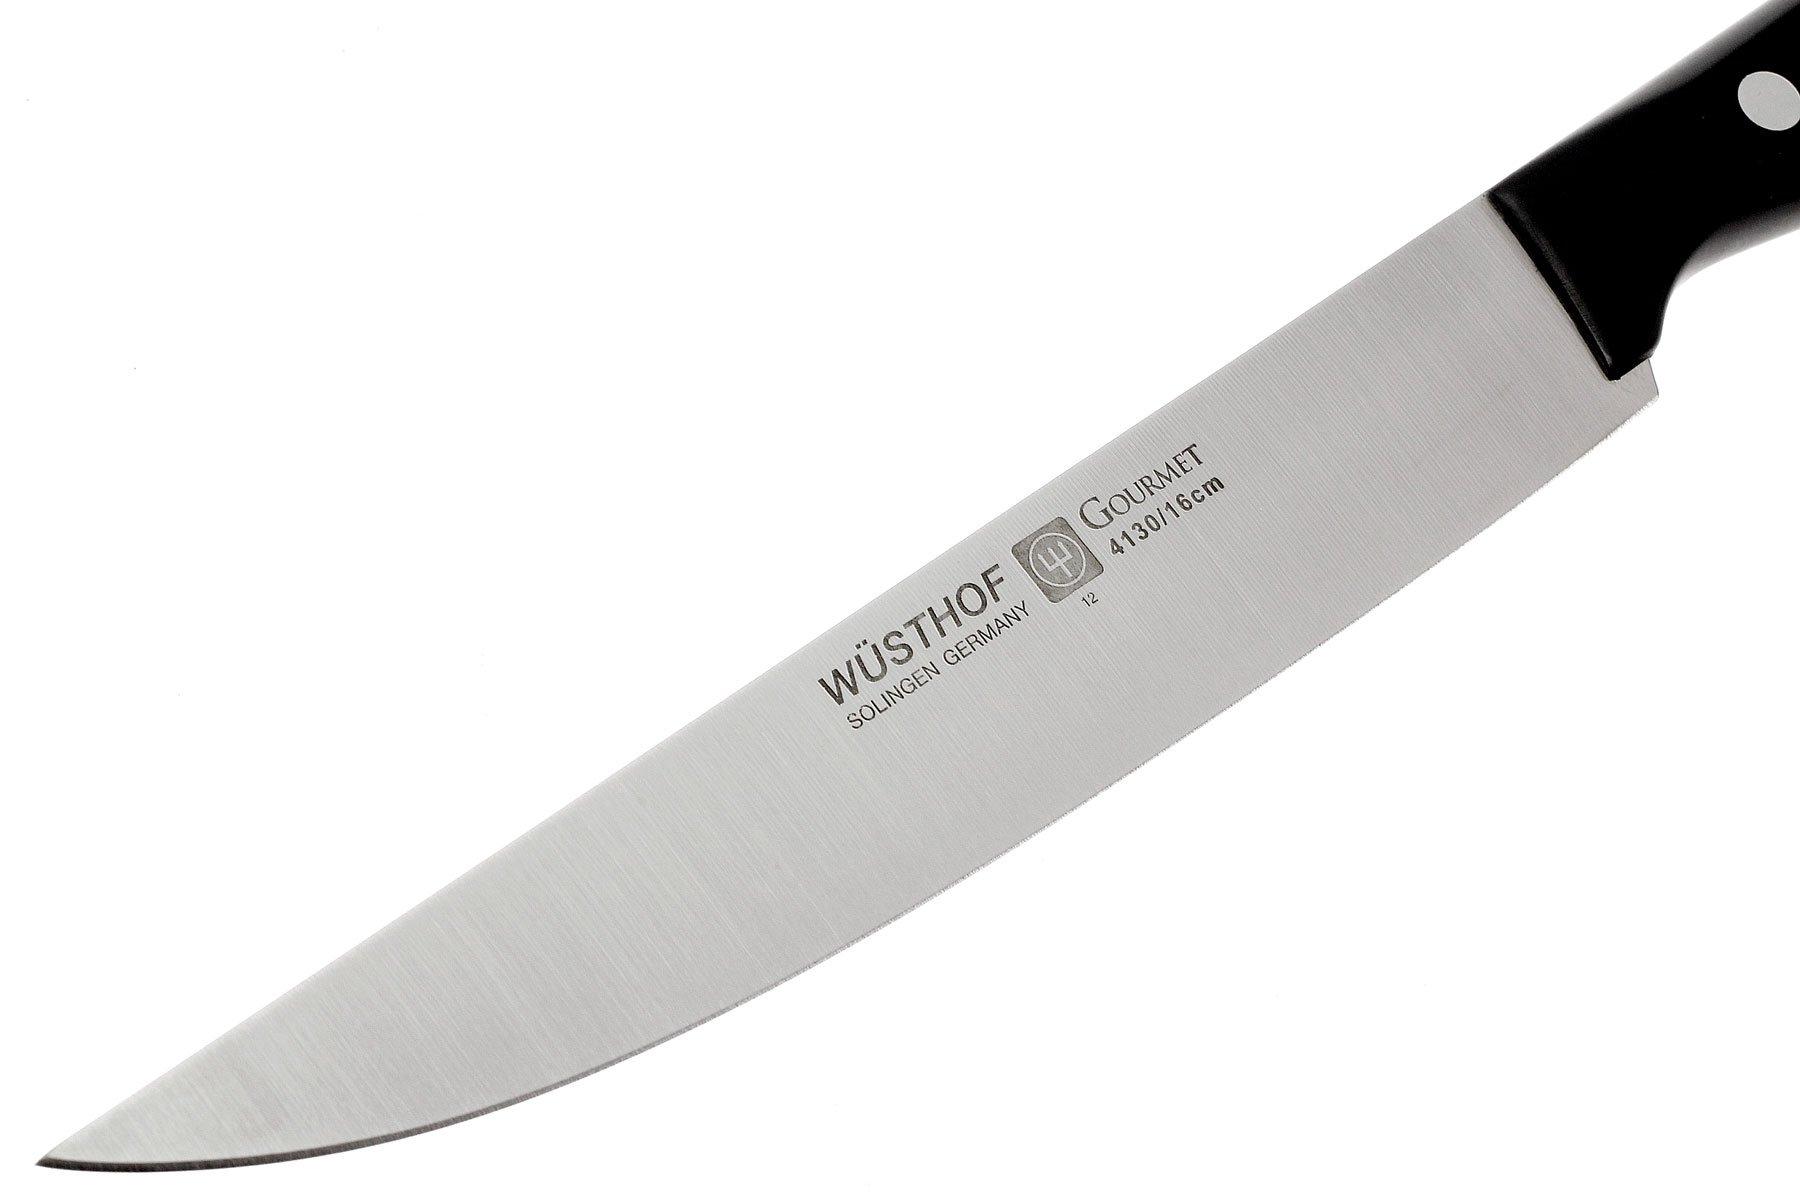 Wusthof Gourmet Chef's knife, 4130/16  Advantageously shopping at